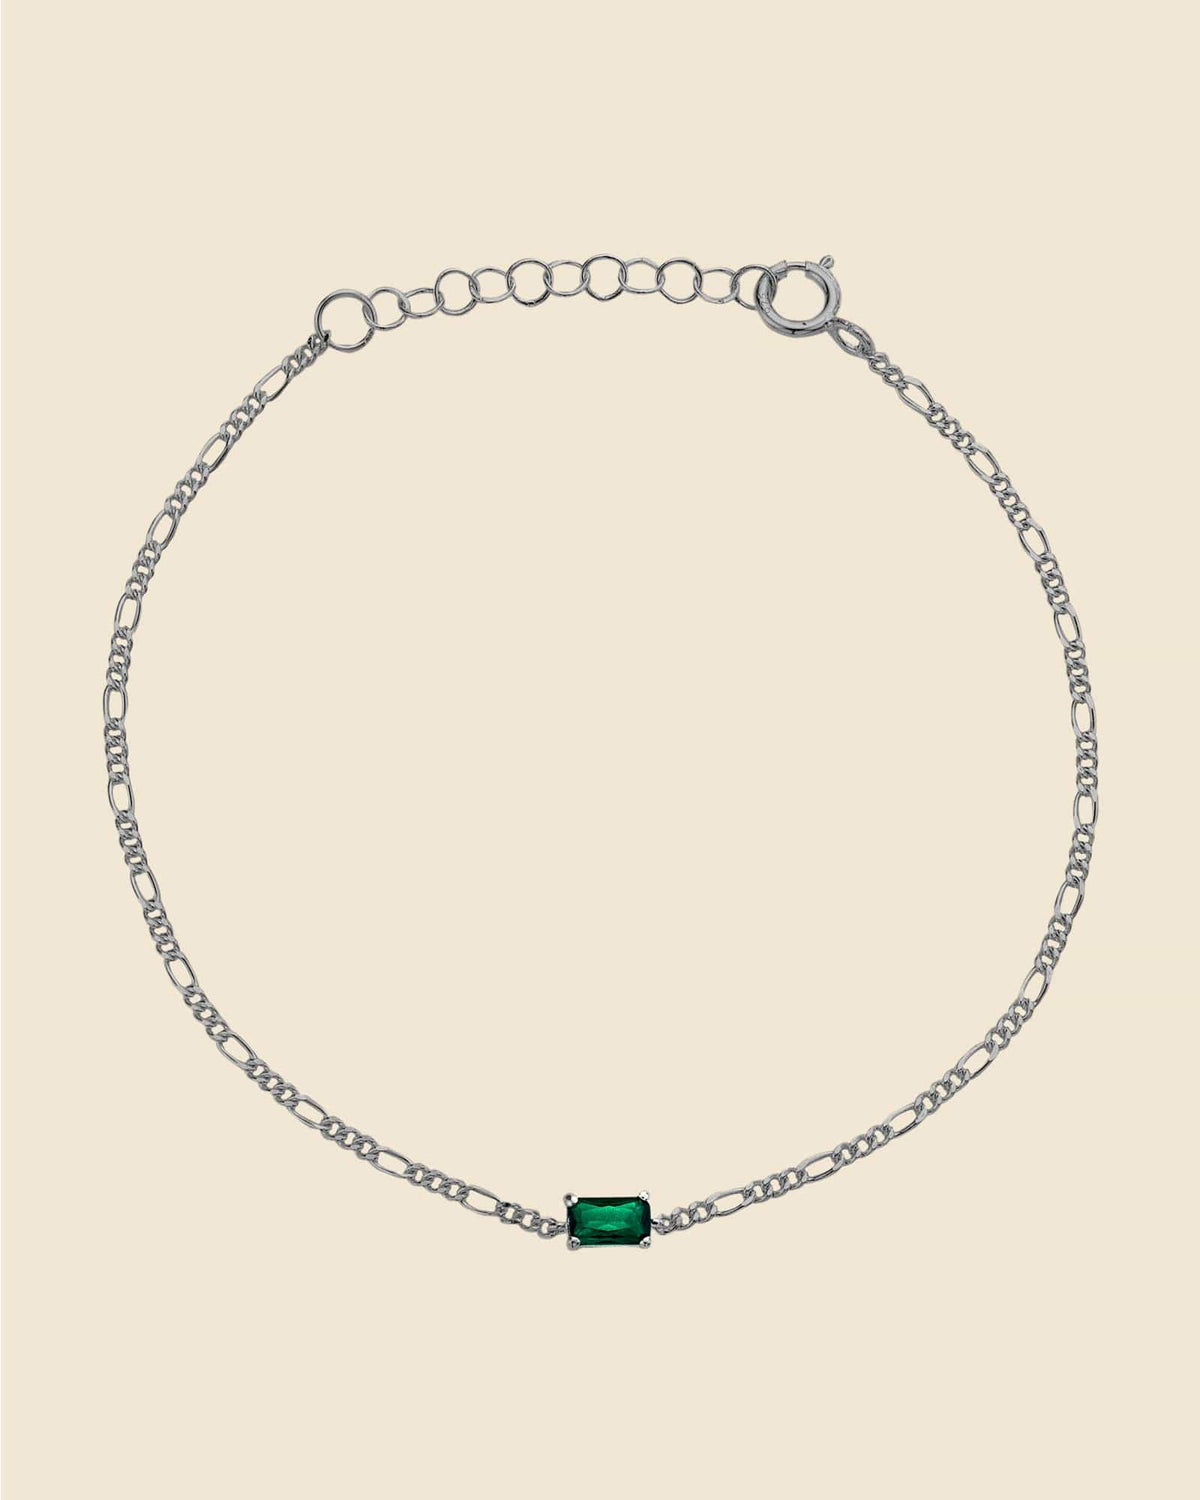 Sterling Silver Figaro Chain Bracelet with Emerald Glass Gem